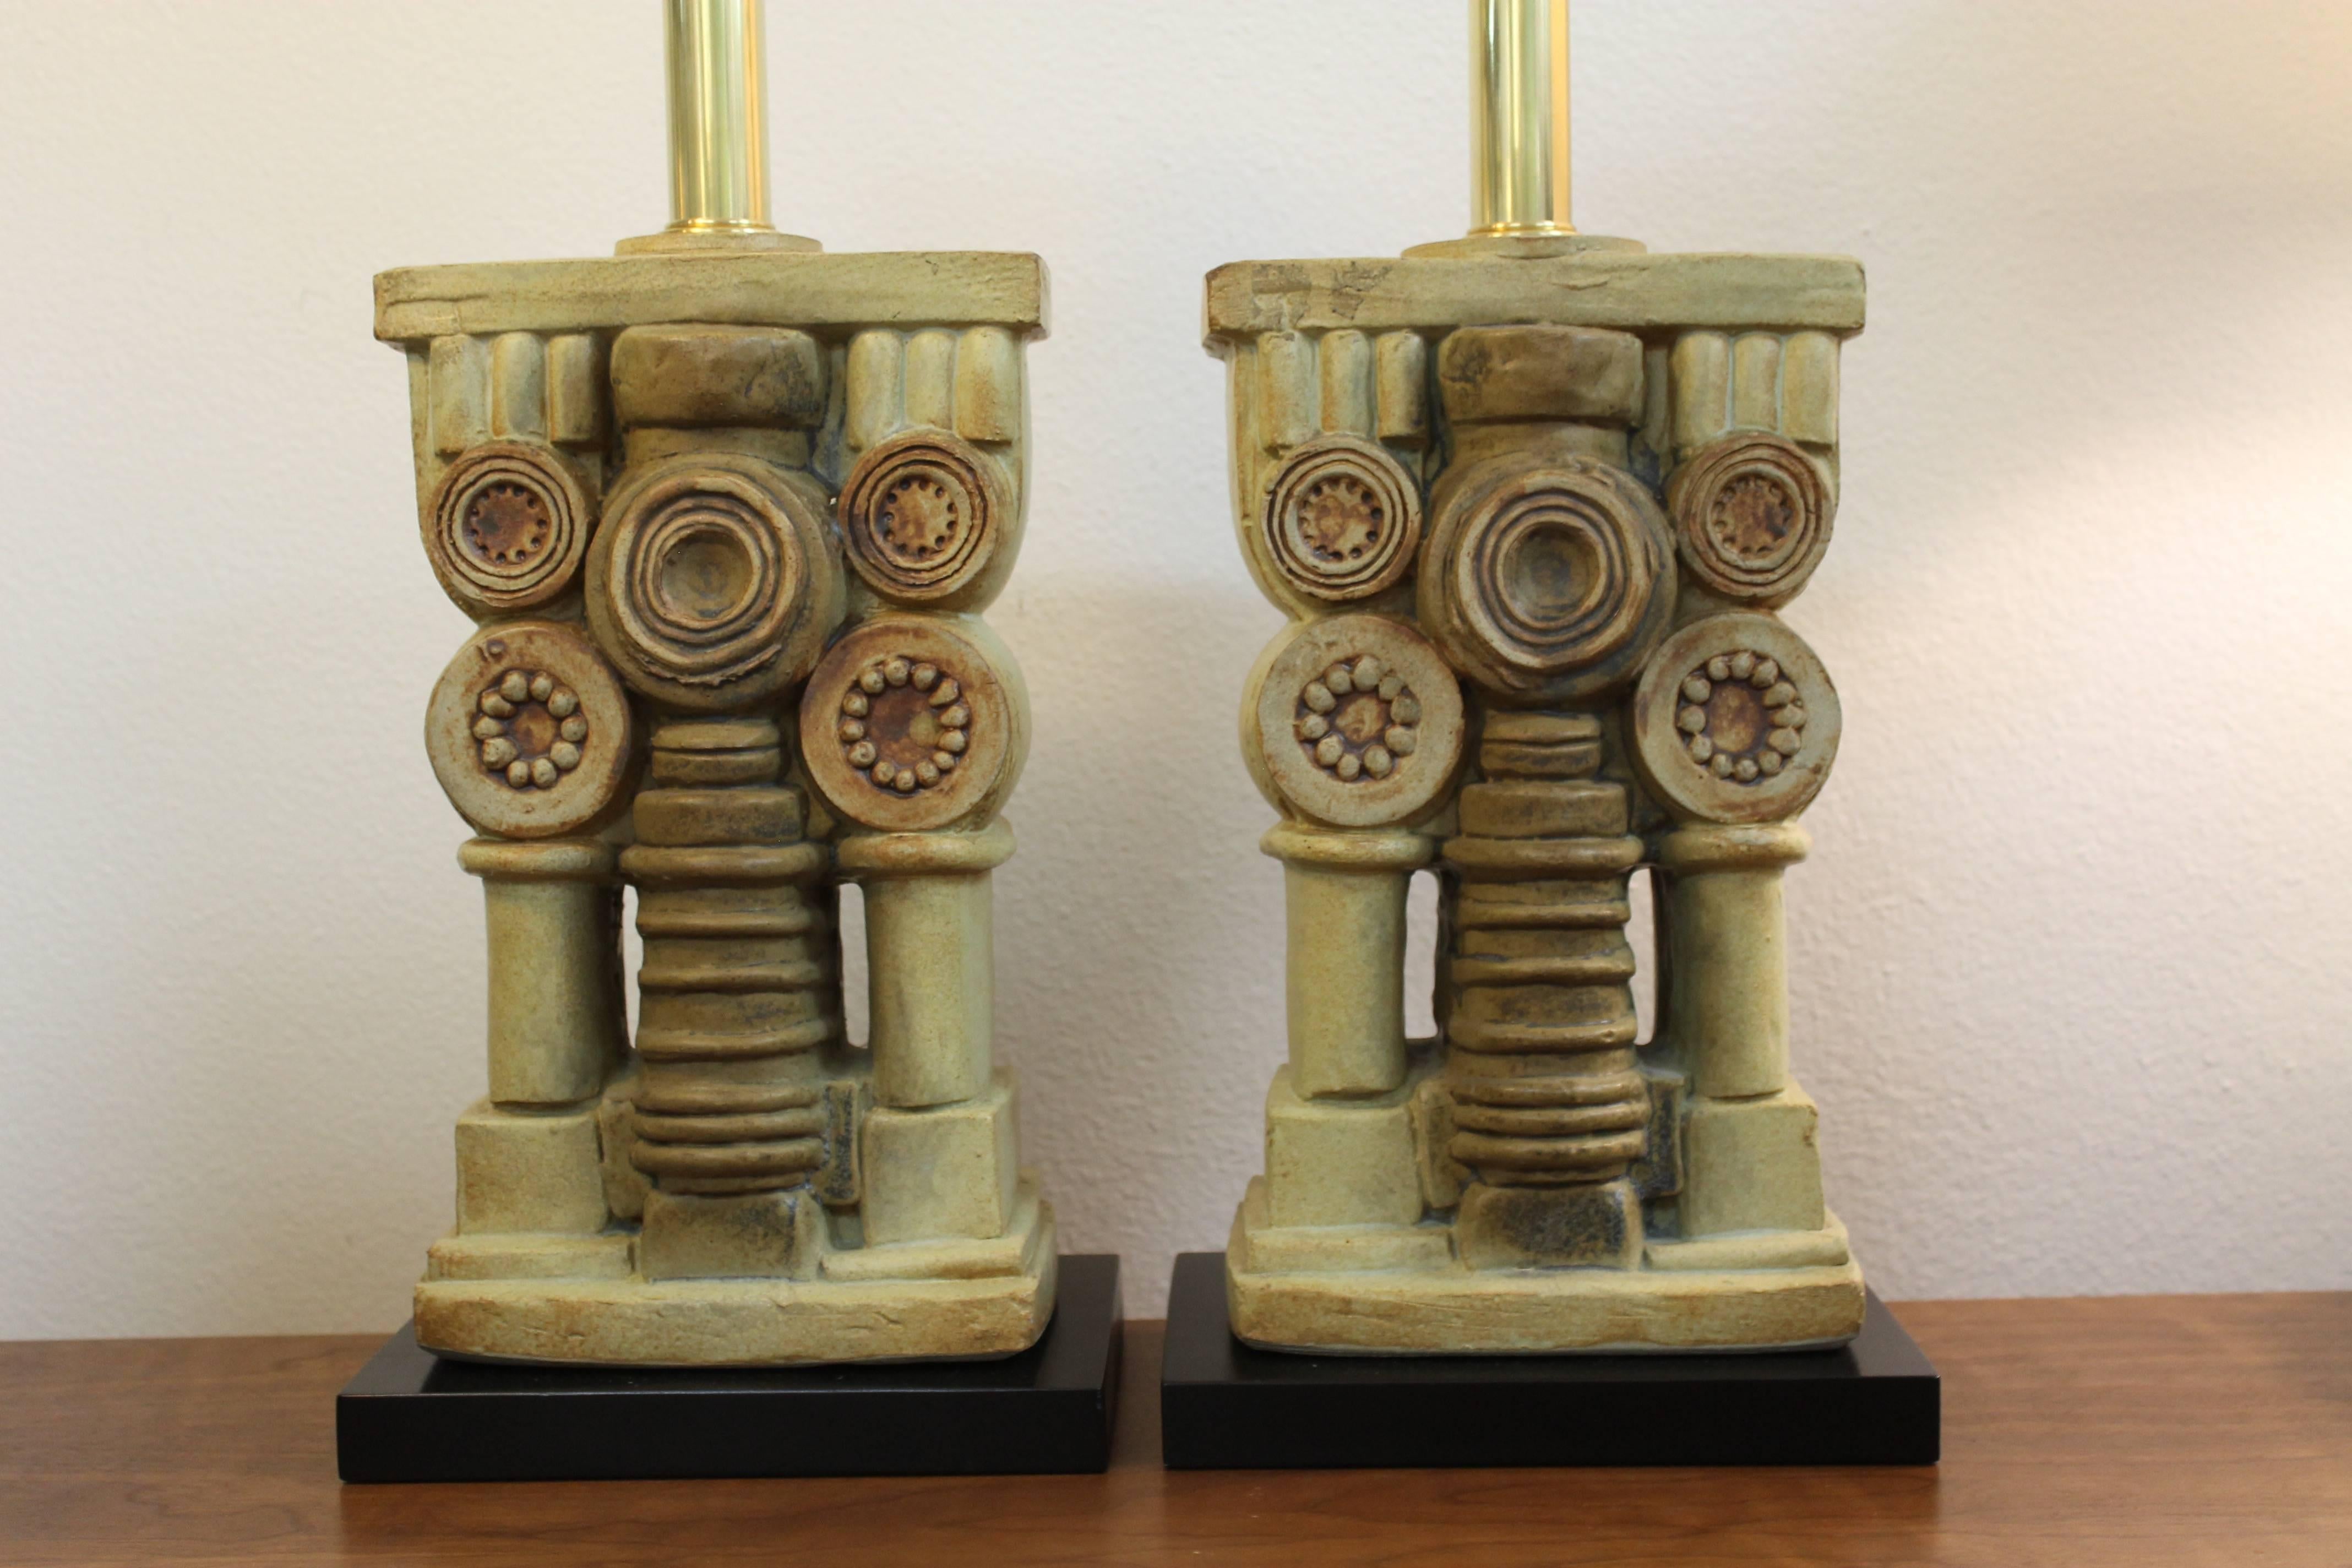 Pair of ceramic lamps by Bernard Rooke. Lamps have been professionally rewired with new black wood bases. Measures: Ceramic portion is 13